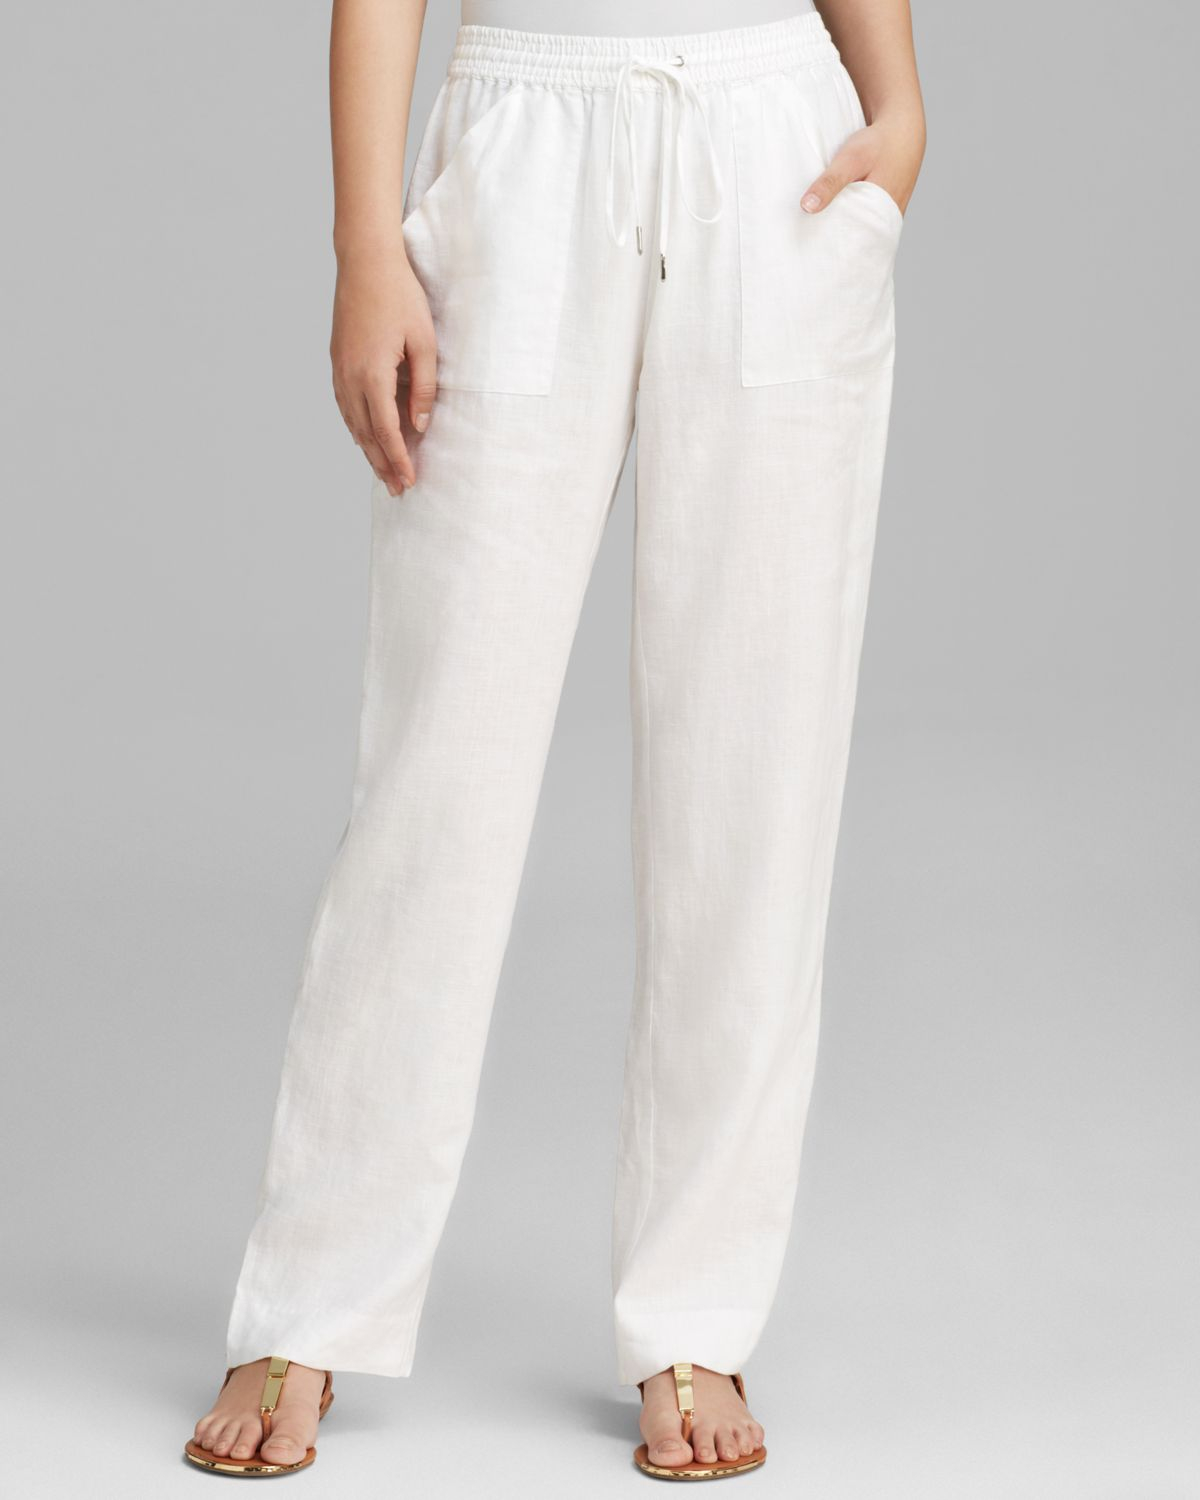 Two by vince camuto Wide Leg Drawstring Pants in White | Lyst